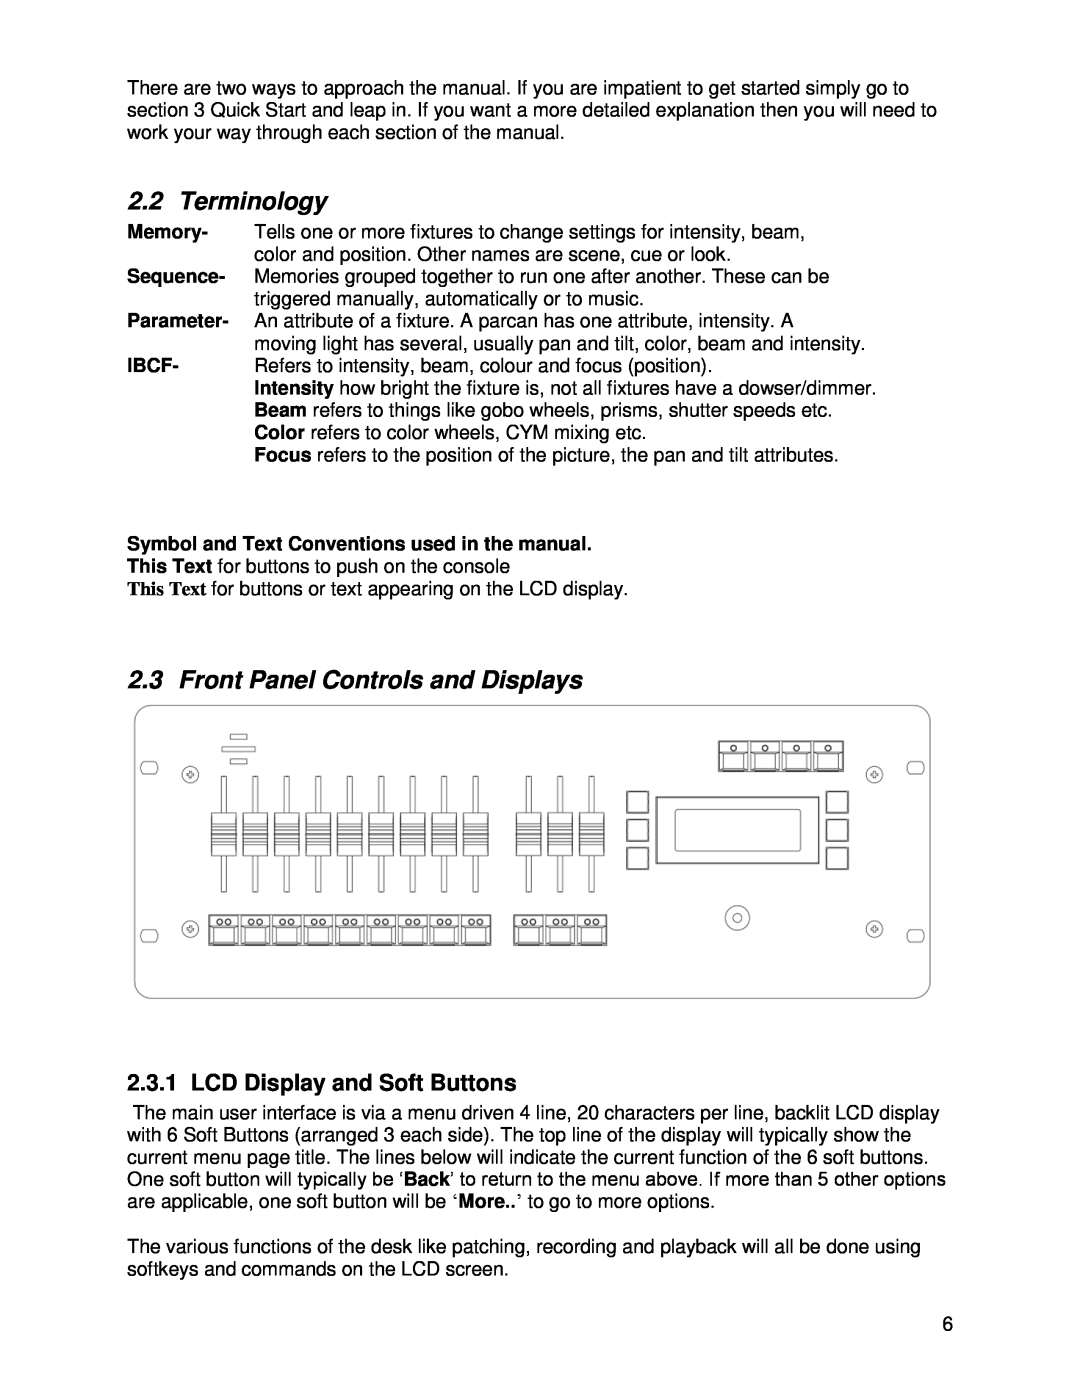 Chauvet DMX 60 user manual Terminology, Front Panel Controls and Displays, LCD Display and Soft Buttons 